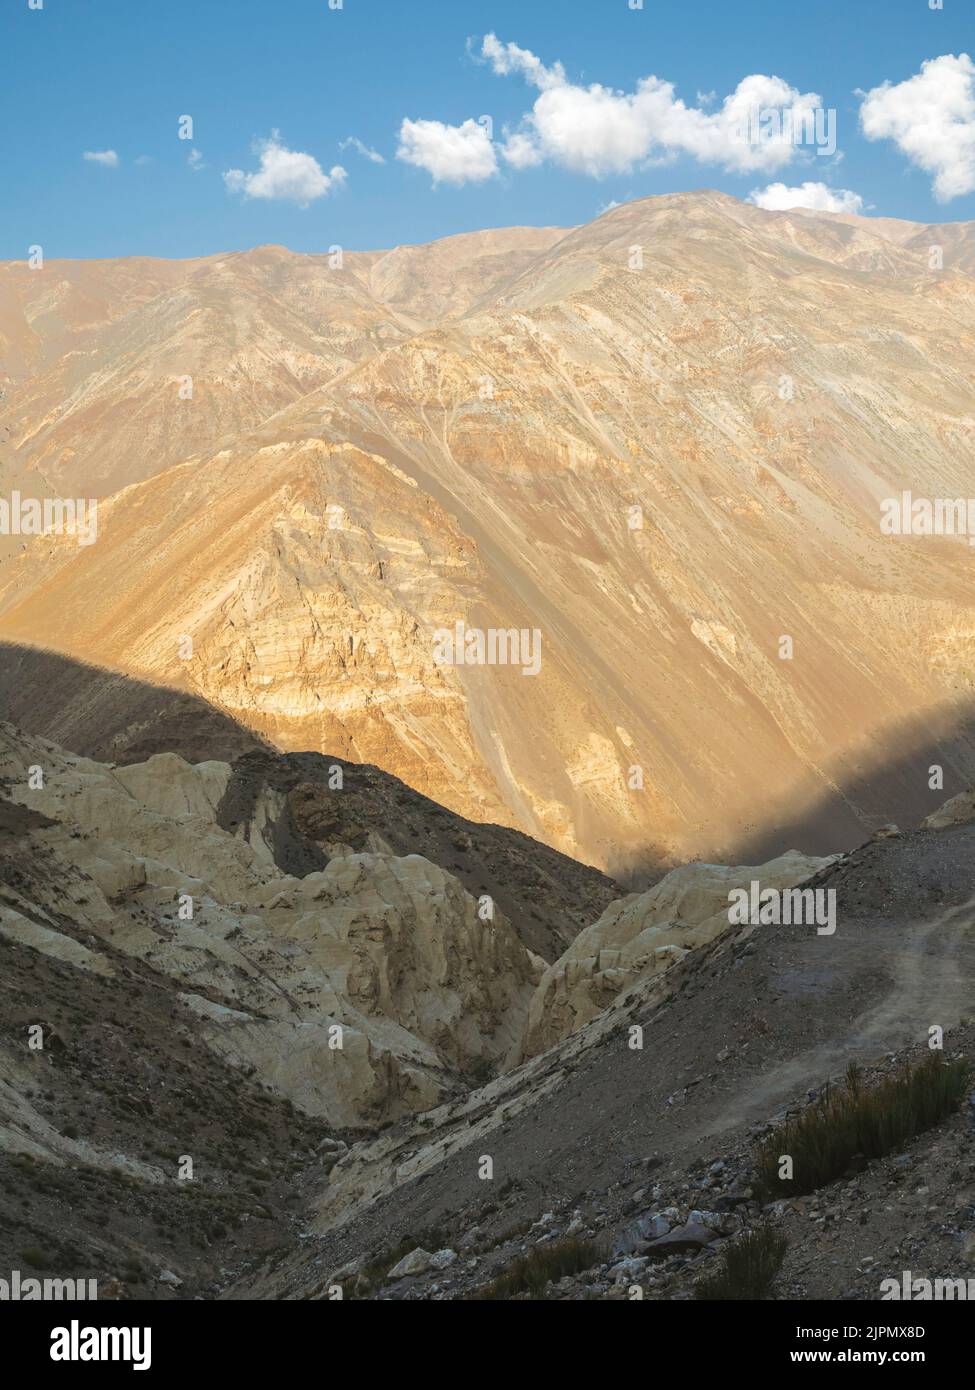 View across the Spiti valley with high ridges and steep slopes of Himalaya mountains under bright blue sky with clouds during summer near Kaza, India. Stock Photo